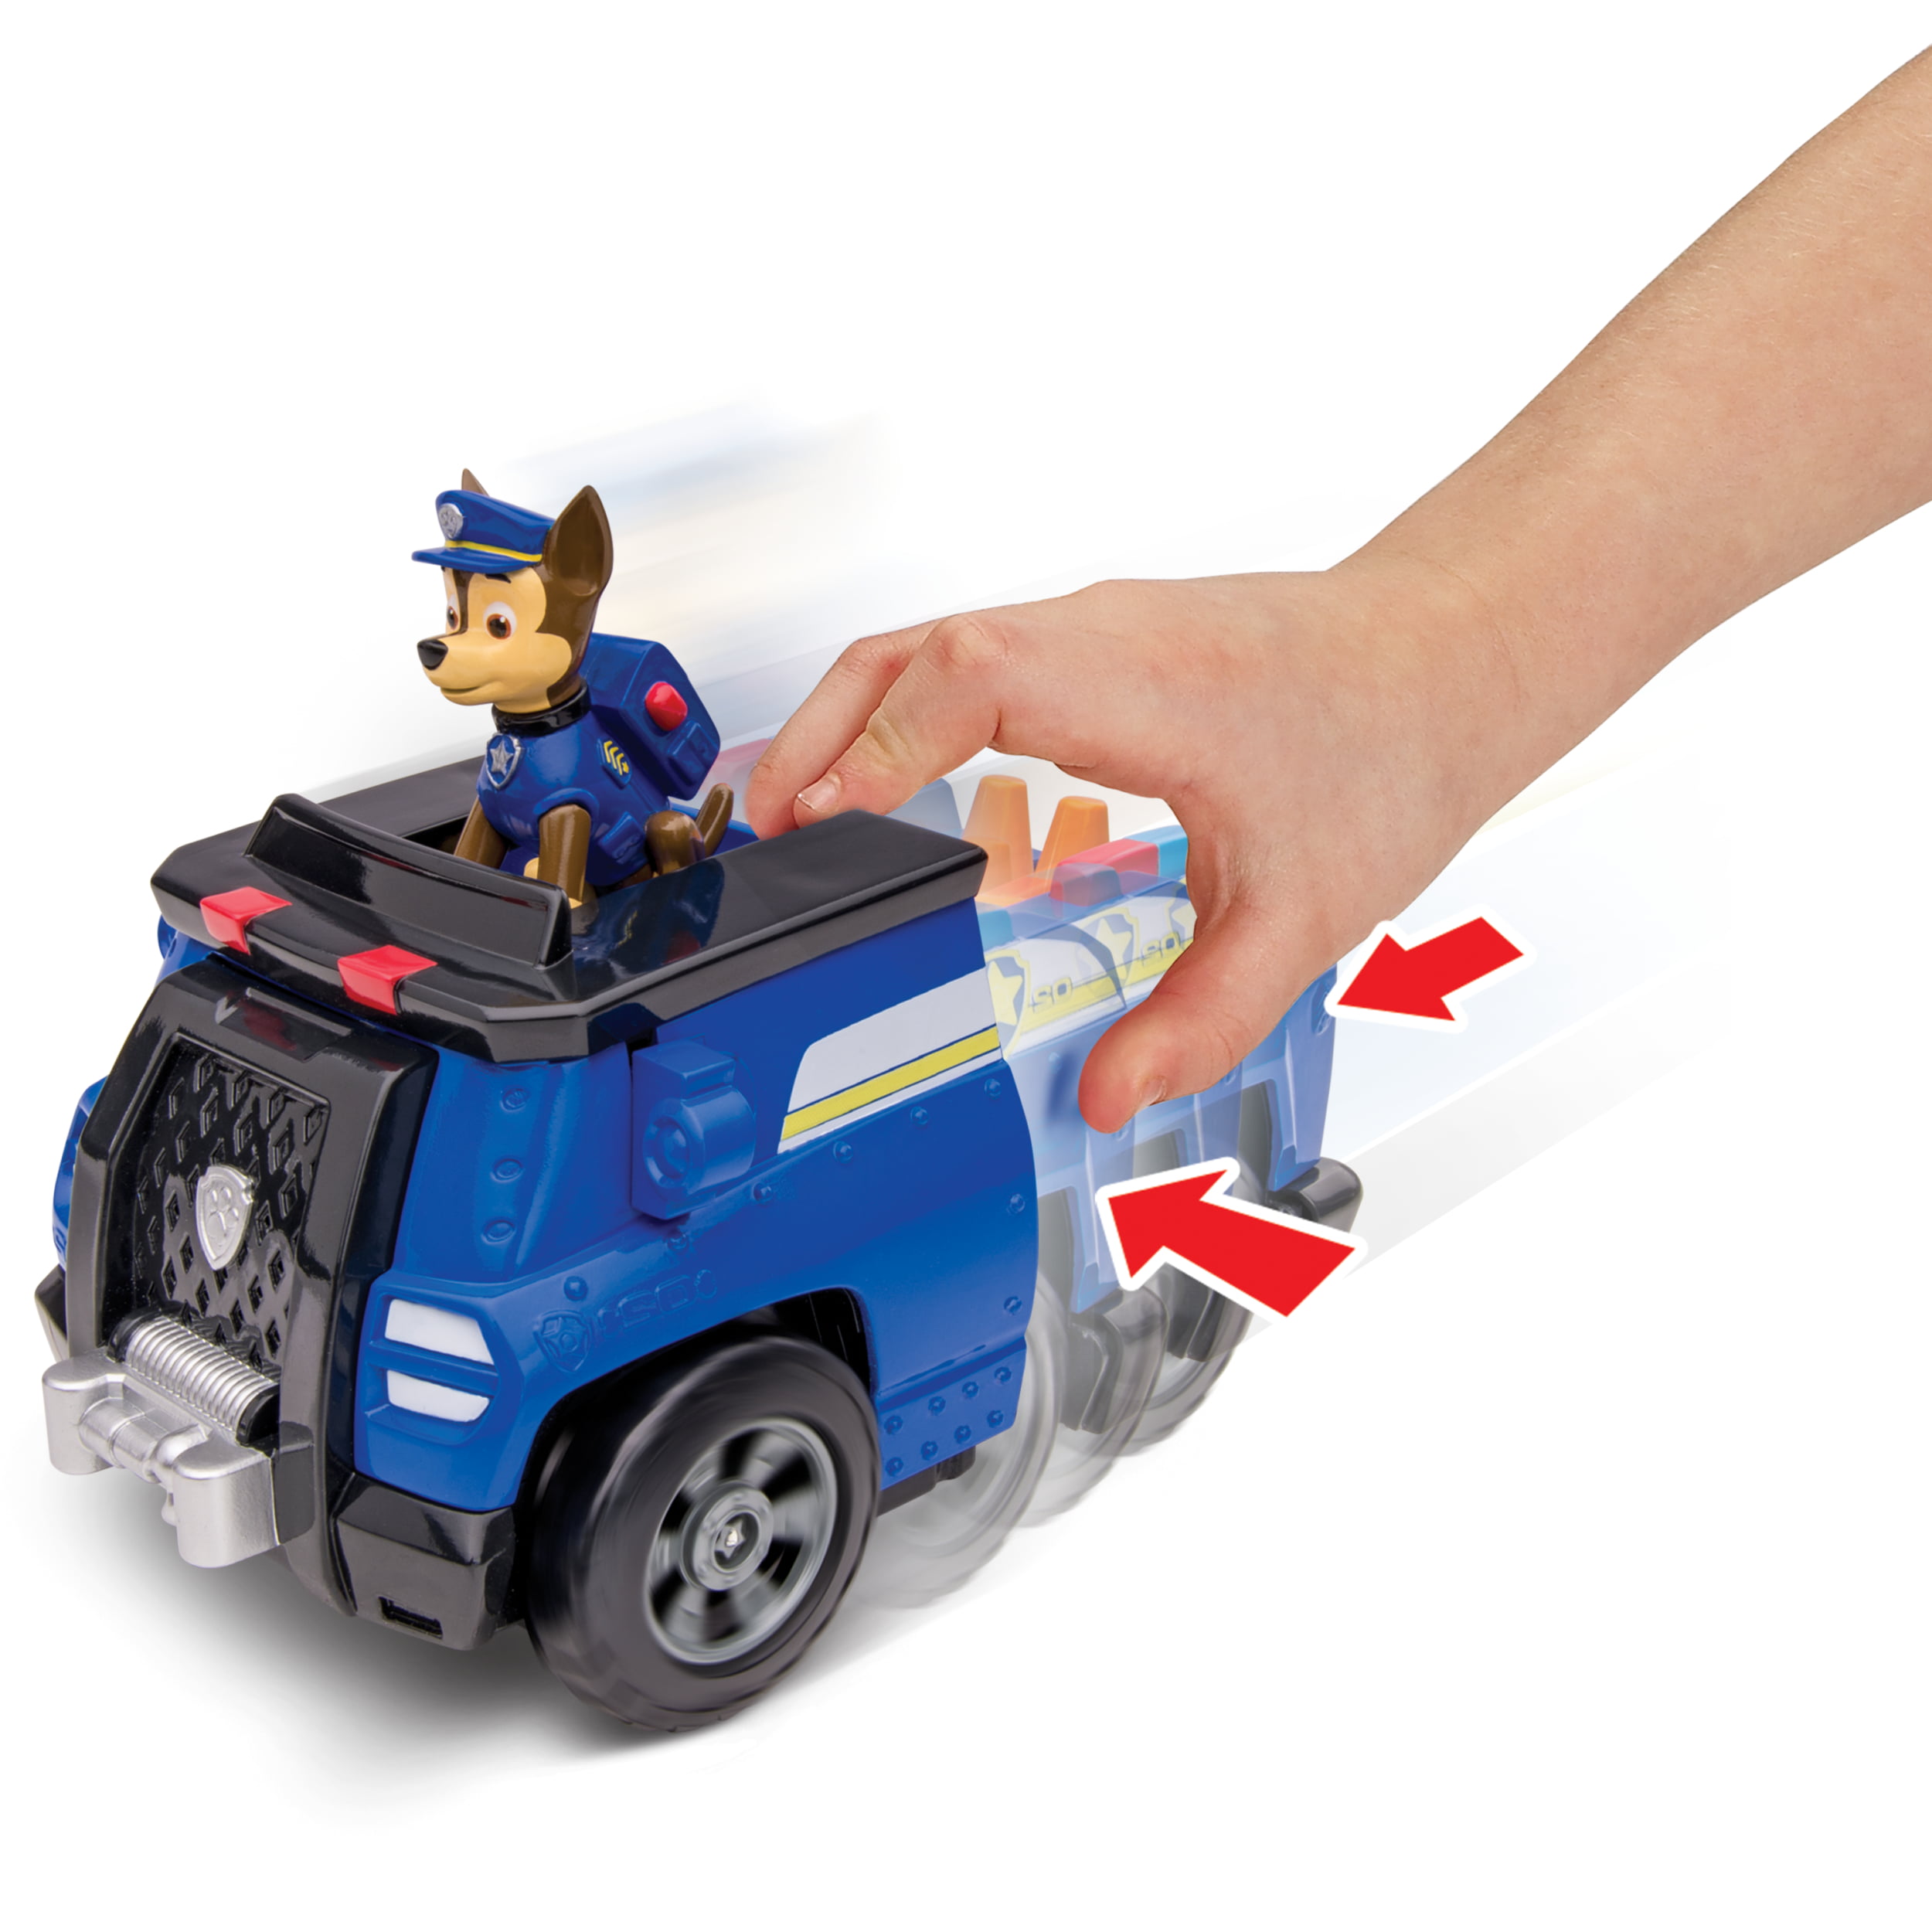 paw patrol on a roll chase